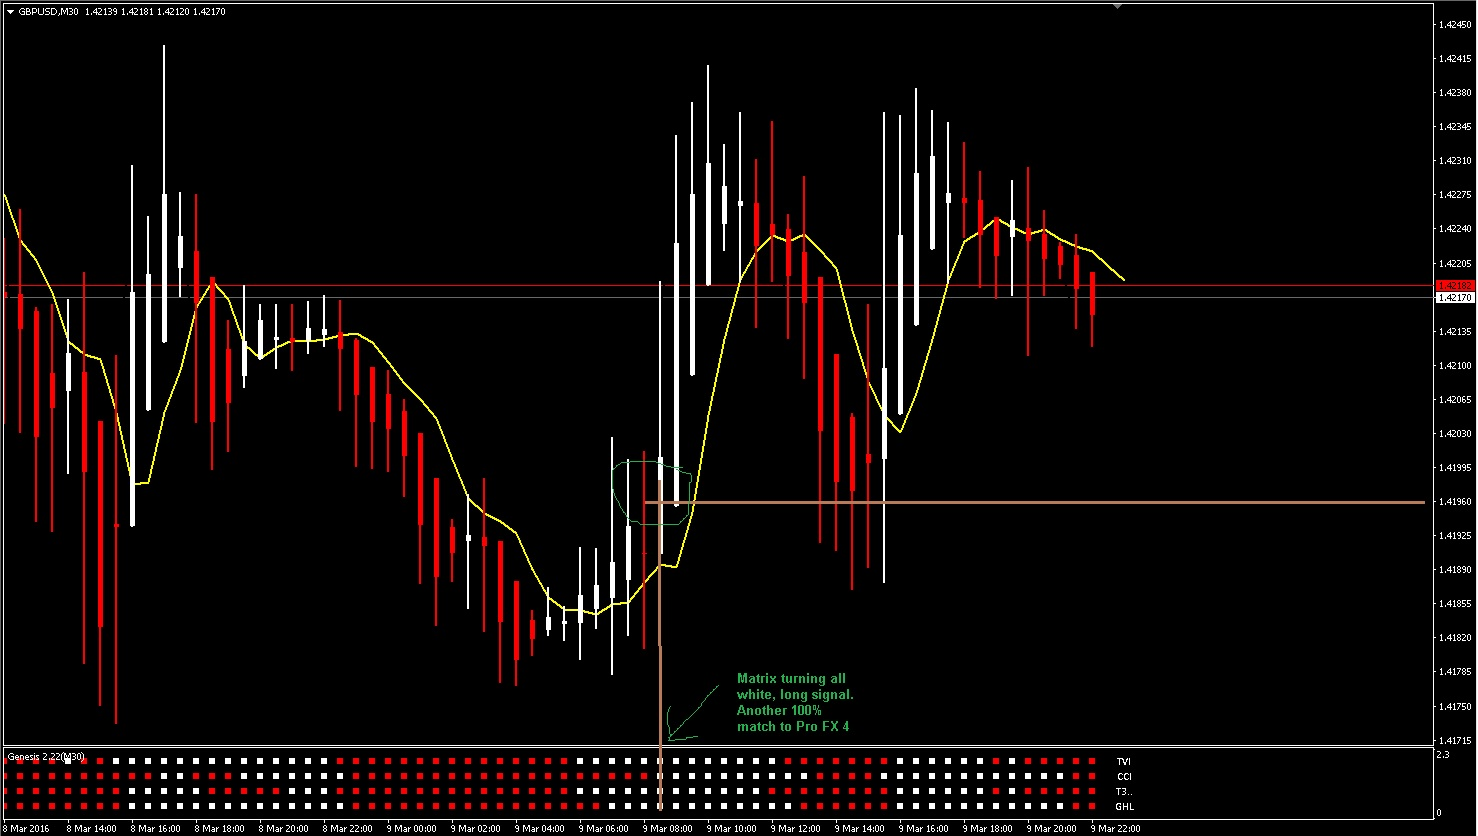 Cashbackforex fxpro system forecast for the day binary options